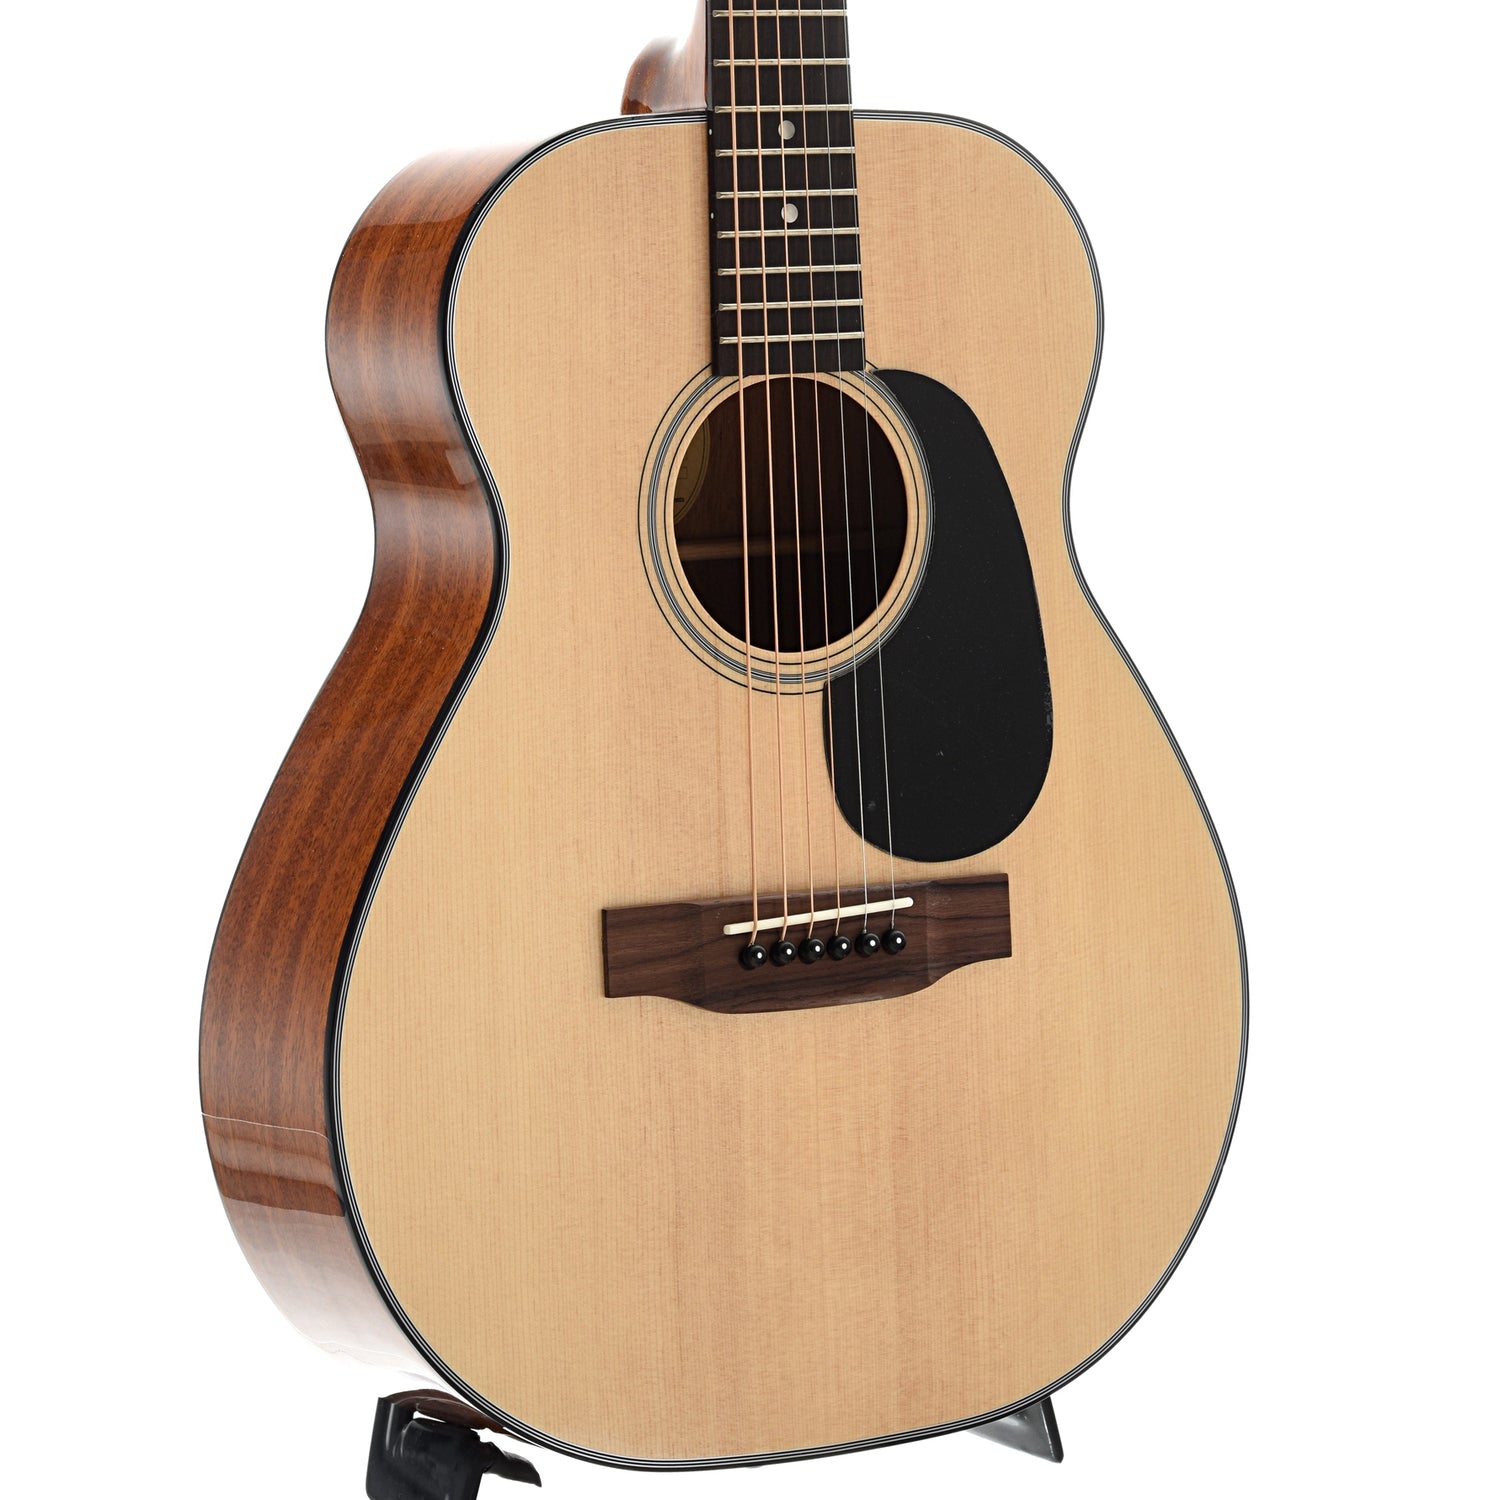 Image 2 of Blueridge Contemporary Series BR-41 "Baby" Acoustic Guitar - SKU# BR41 : Product Type Flat-top Guitars : Elderly Instruments